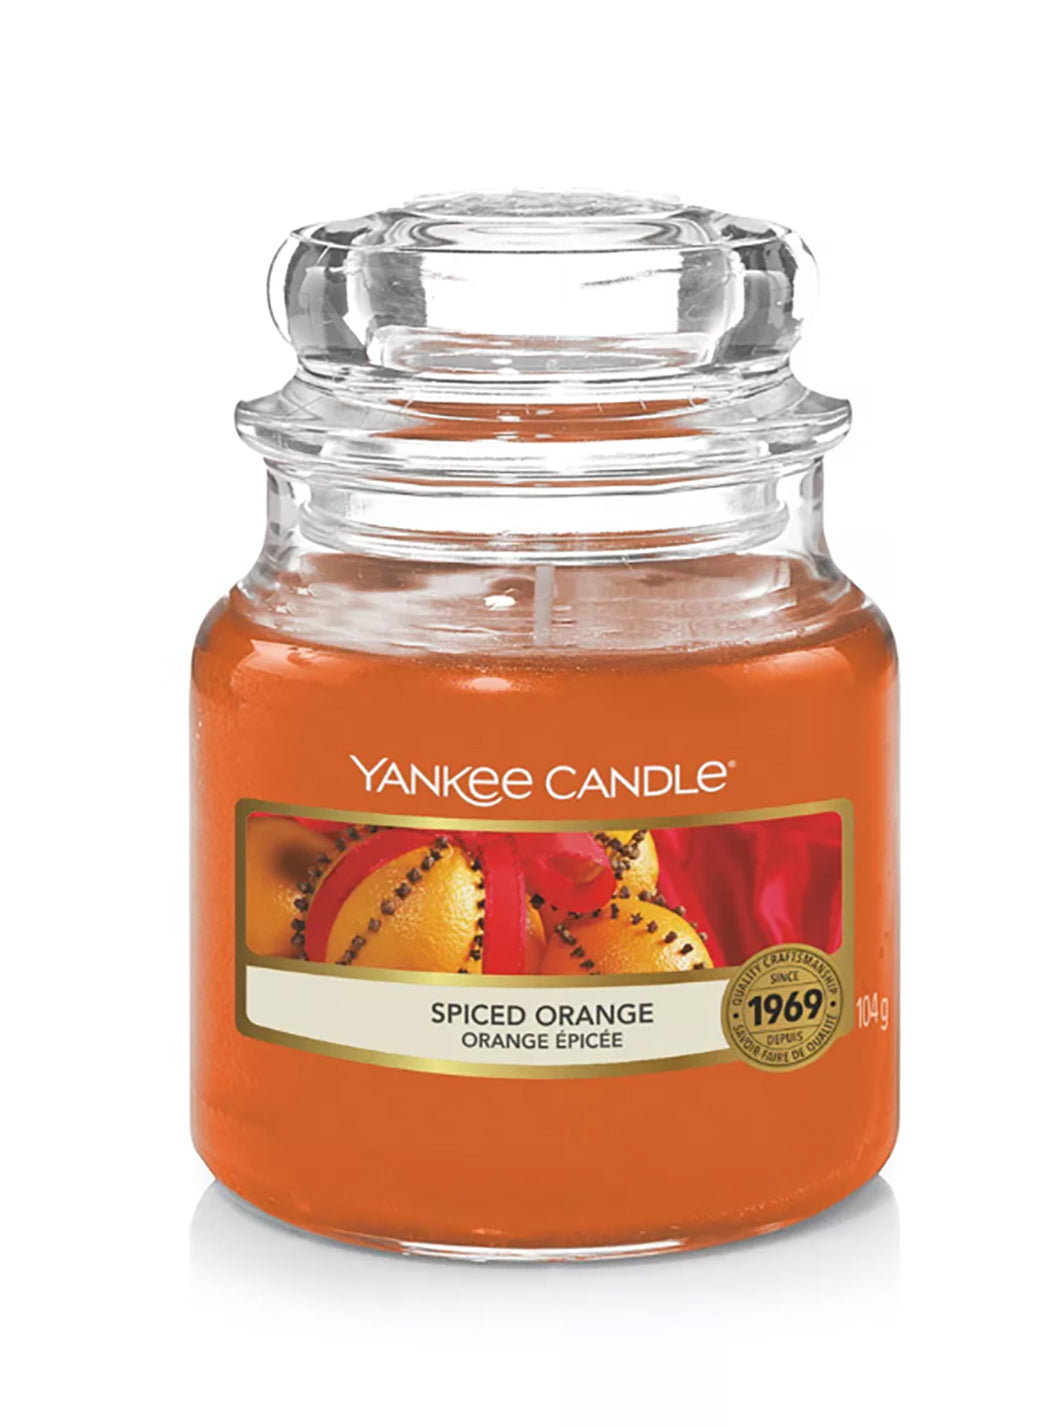 Yankee Candle Spiced Orange Small Jar Candle